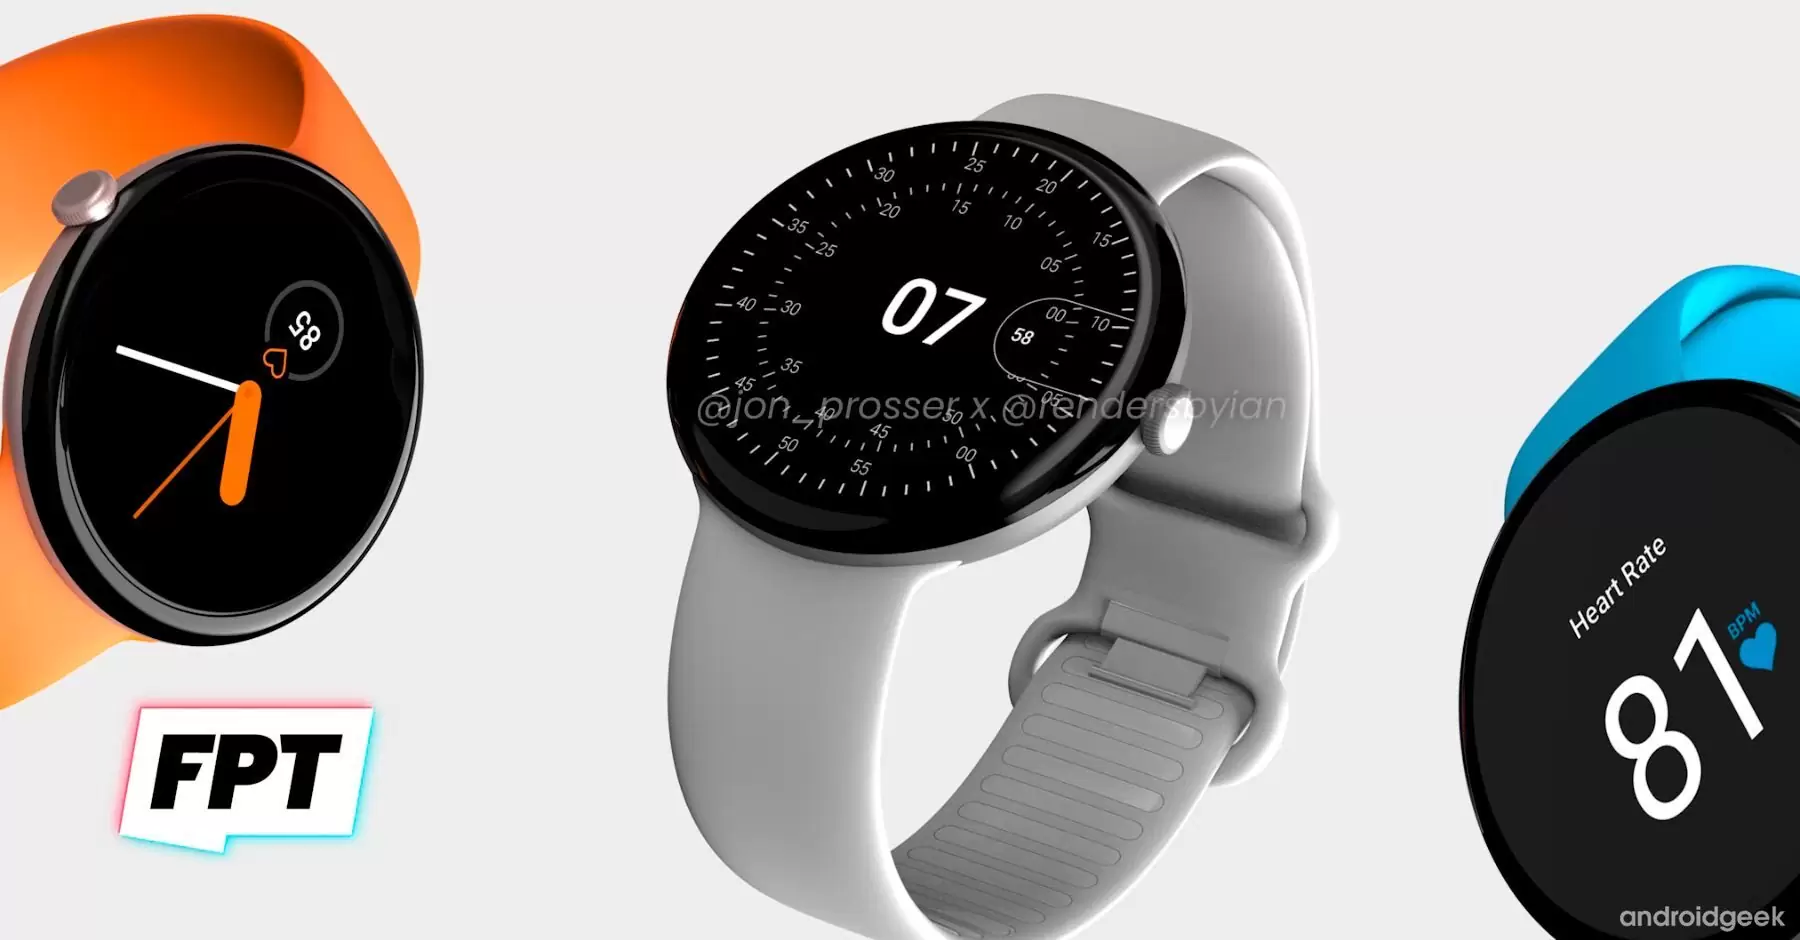 Google is very strong in its hardware department and this Pixel Watch is proof of that